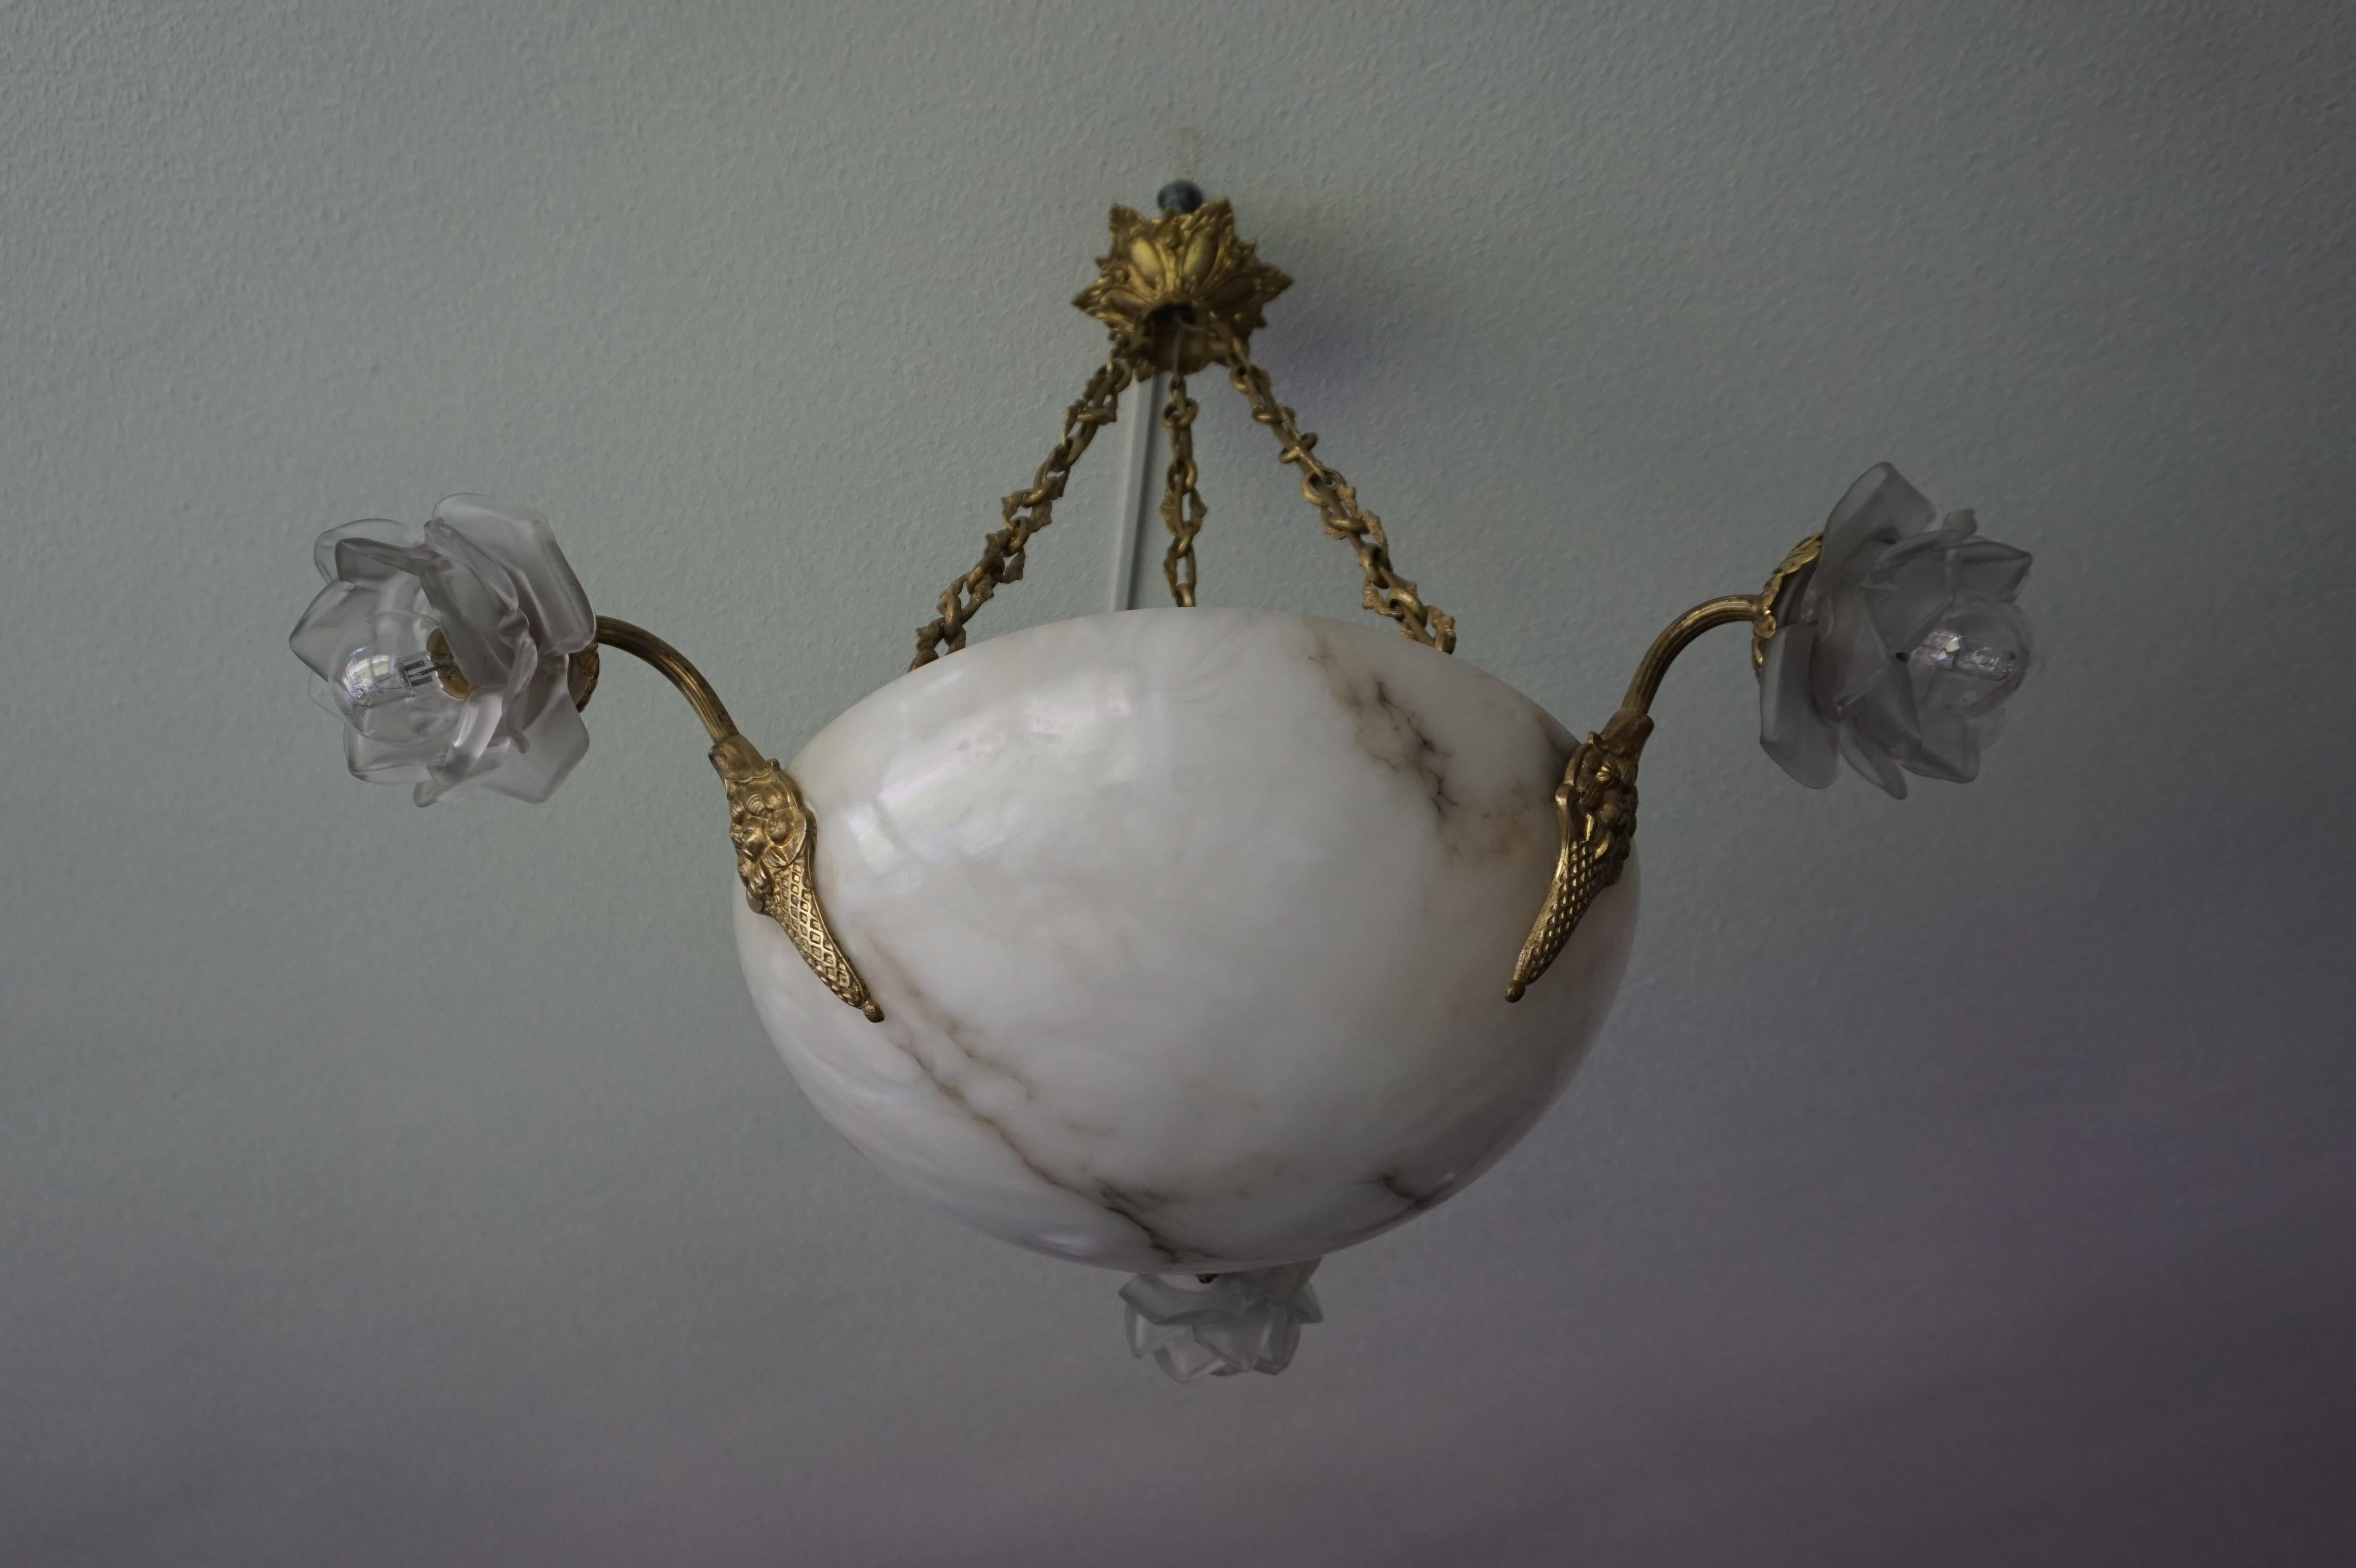 Vintage French, four light pendant.

This stunning and highly stylish chandelier originates from early twentieth century France and to have found it in this superb condition more than made our day. The alabaster bowl has no cracks or chips at all